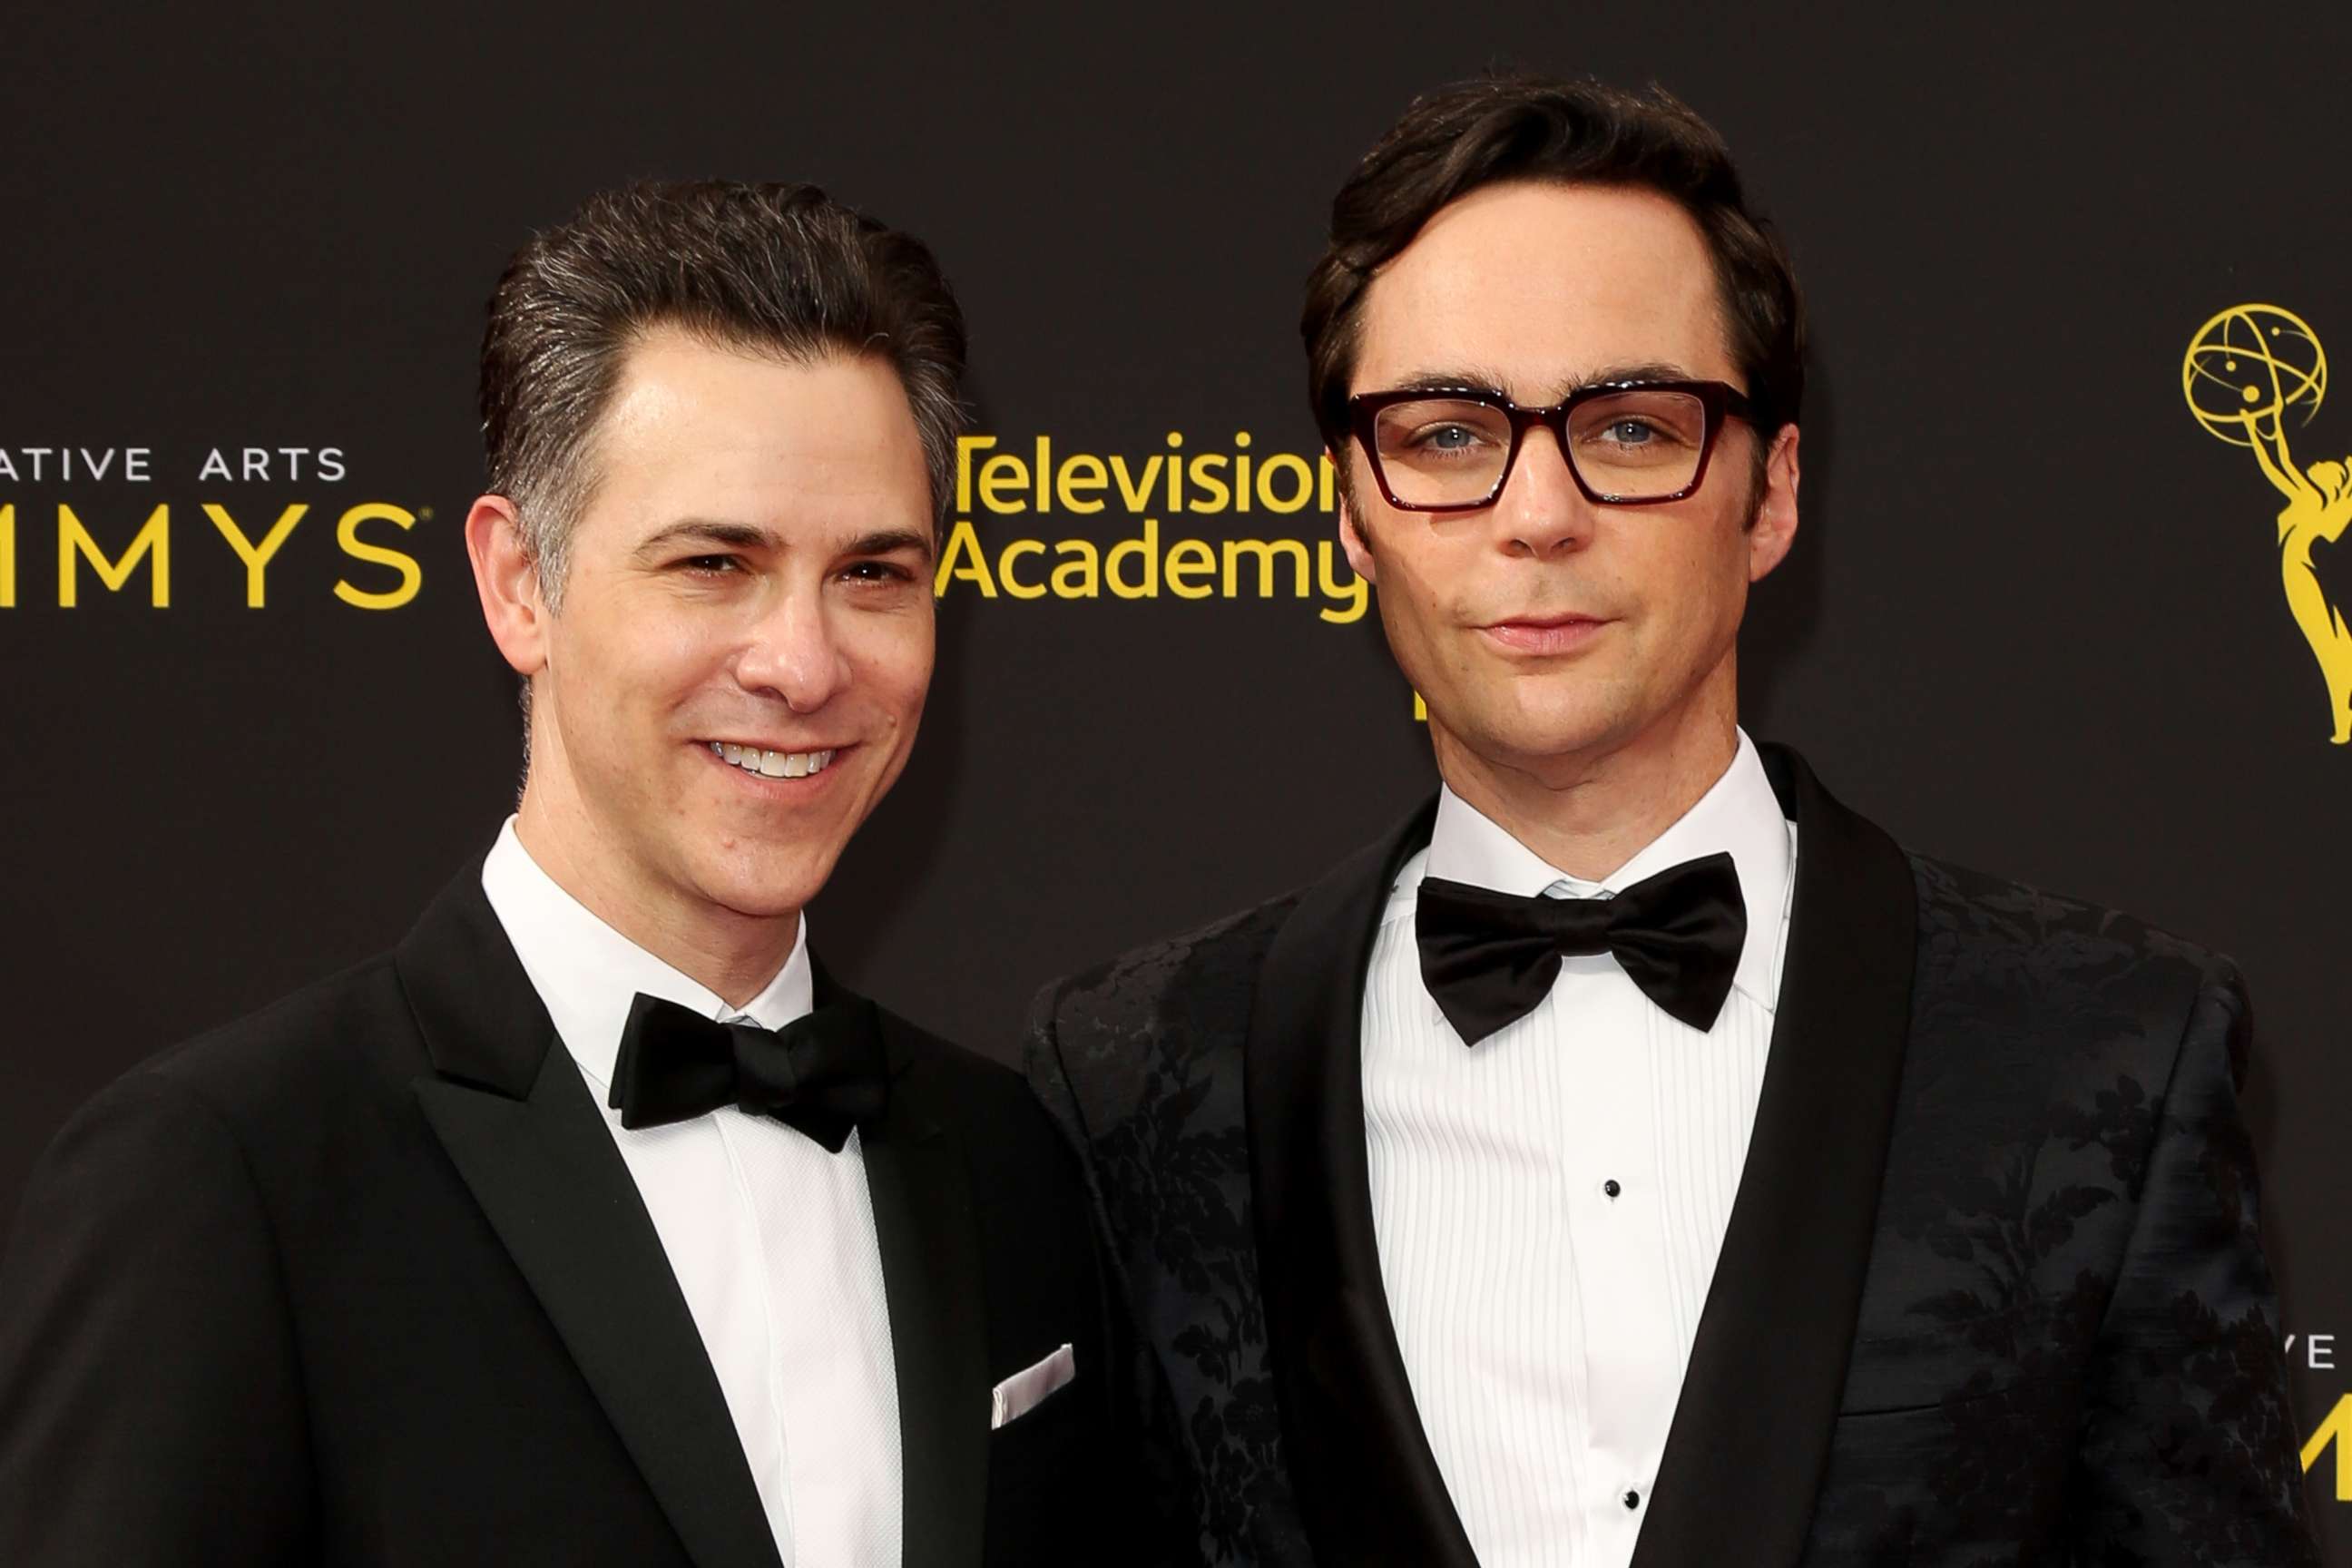 PHOTO: Jim Parsons and Todd Spiewak attend the 2019 Creative Arts Emmy Awards, Sept. 15, 2019, in Los Angeles.